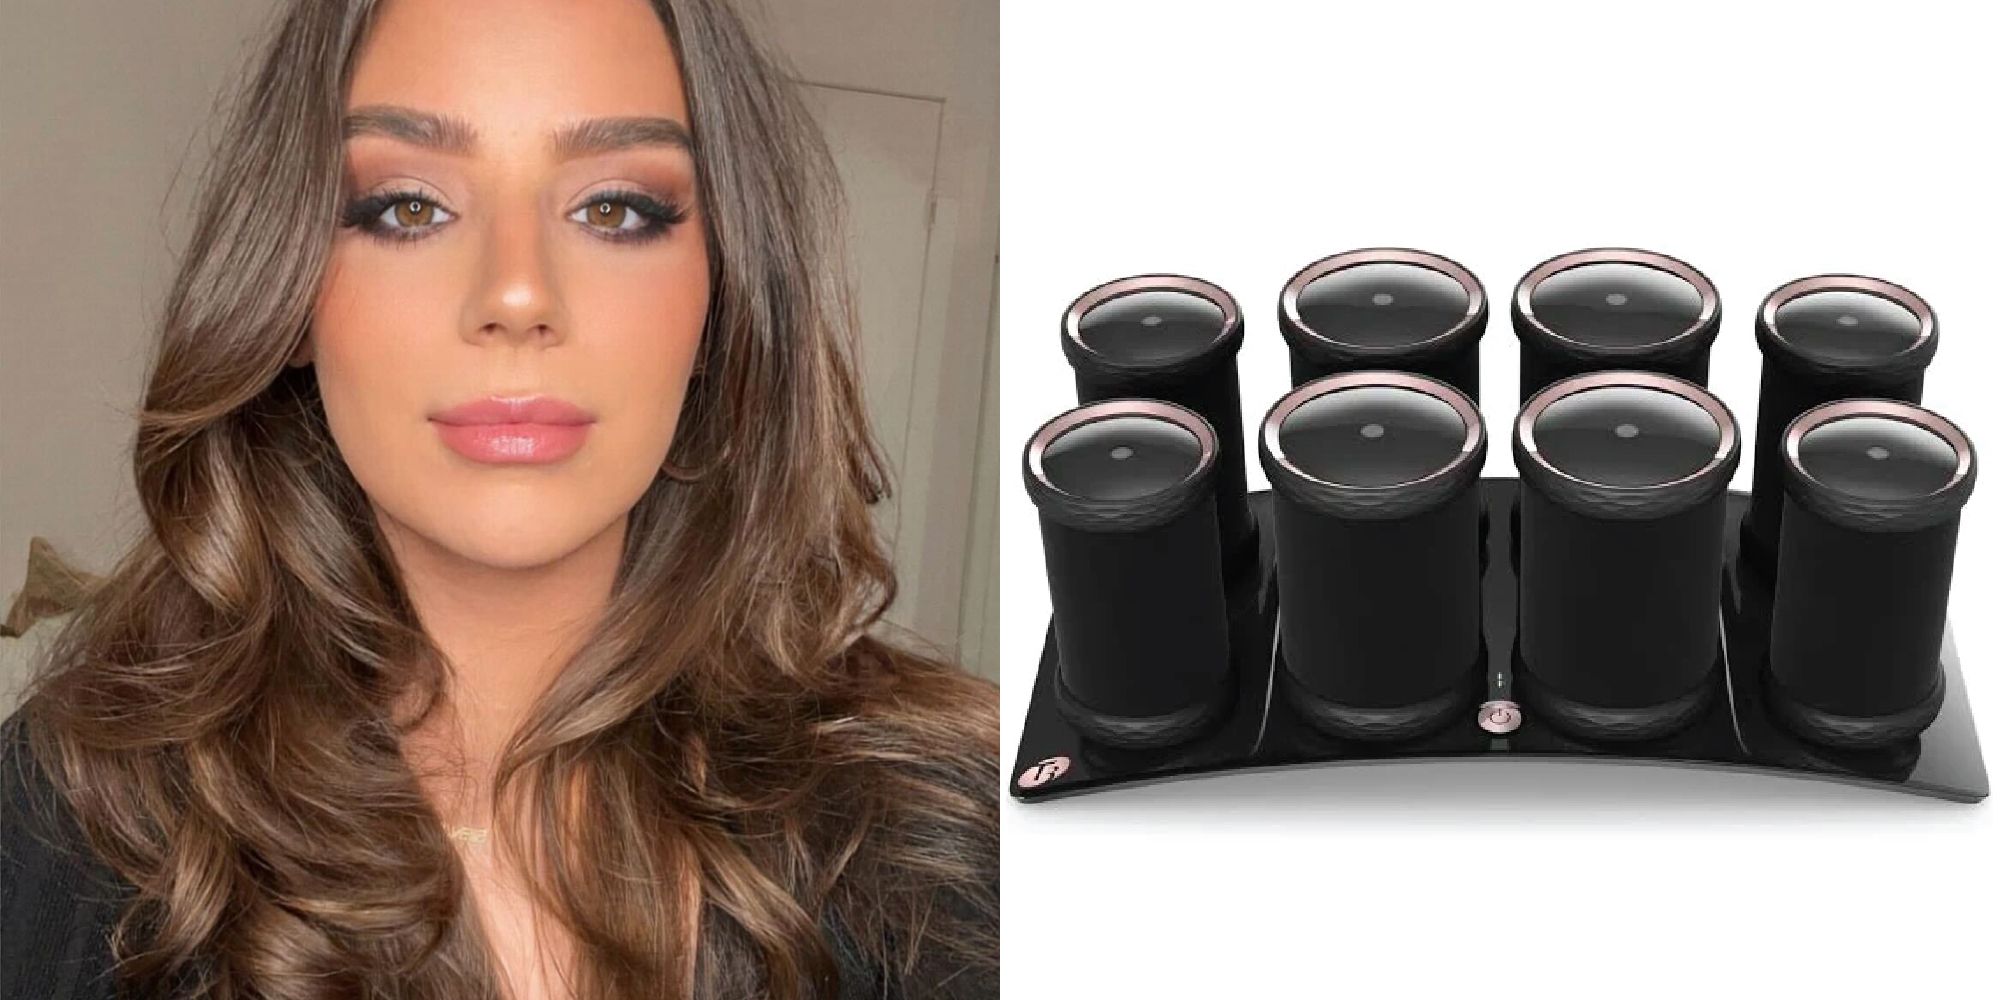 I always struggled to get volume but found an easy way to get bouncy hair  every time - I'm trolled for it but who cares | The US Sun